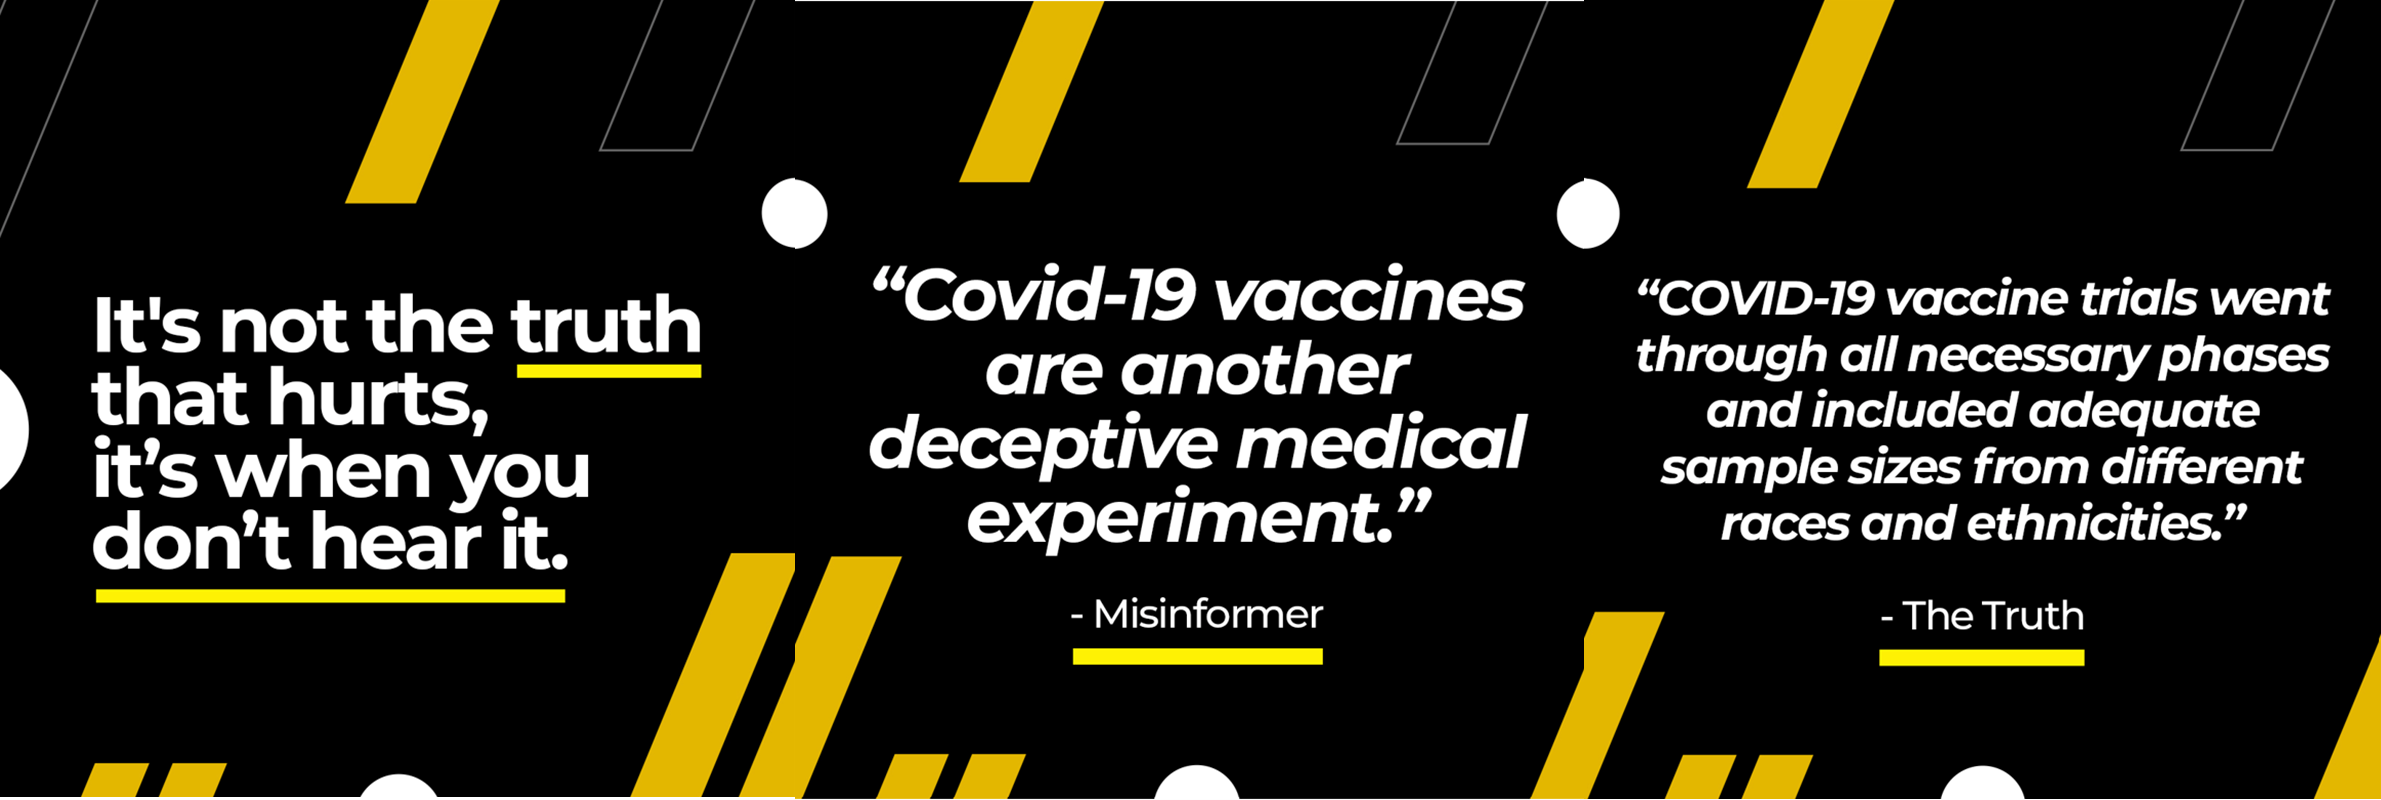 It's not the truth that hurts it's when you don't hear it. "Covid-19 vaccines are another deceptive medical experiment." Misinformer. "COVID-19 vaccine trials went through all necessary phases and included adequate sample sizes from different races and ethnicities." Truth